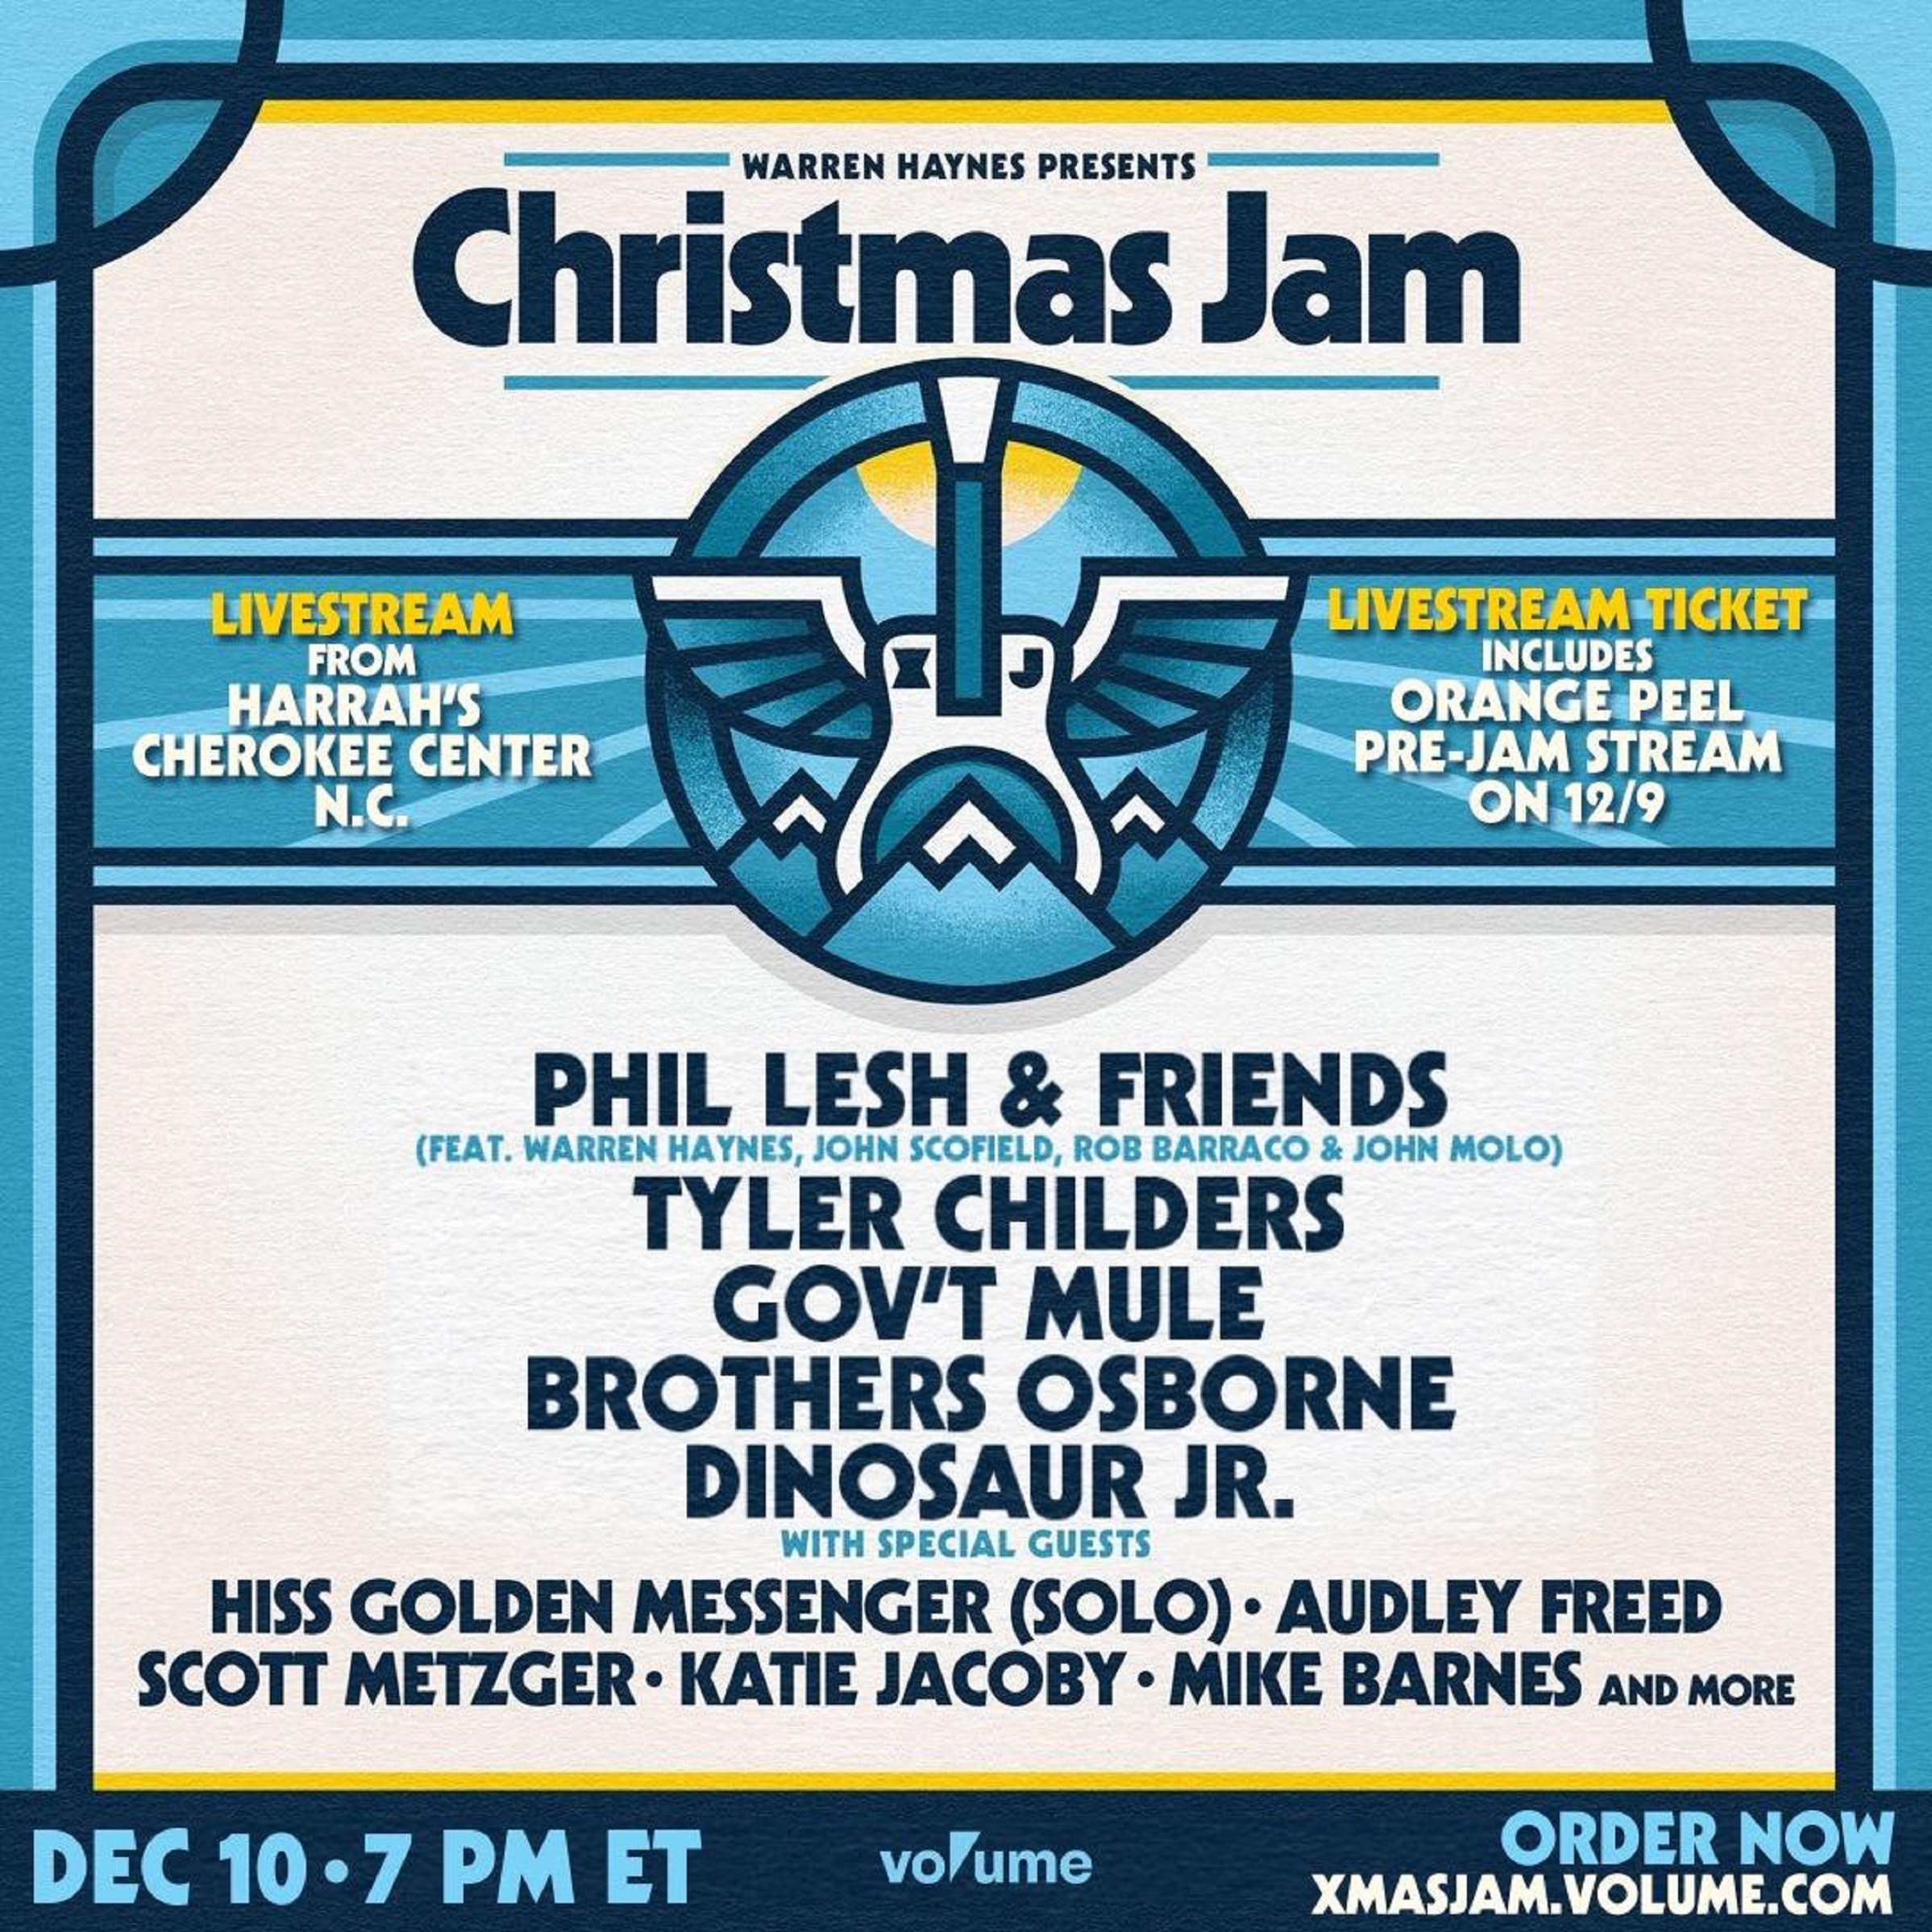 Warren Haynes Presents: Christmas Jam Announces Livestream and Christmas Jam By Day Lineup